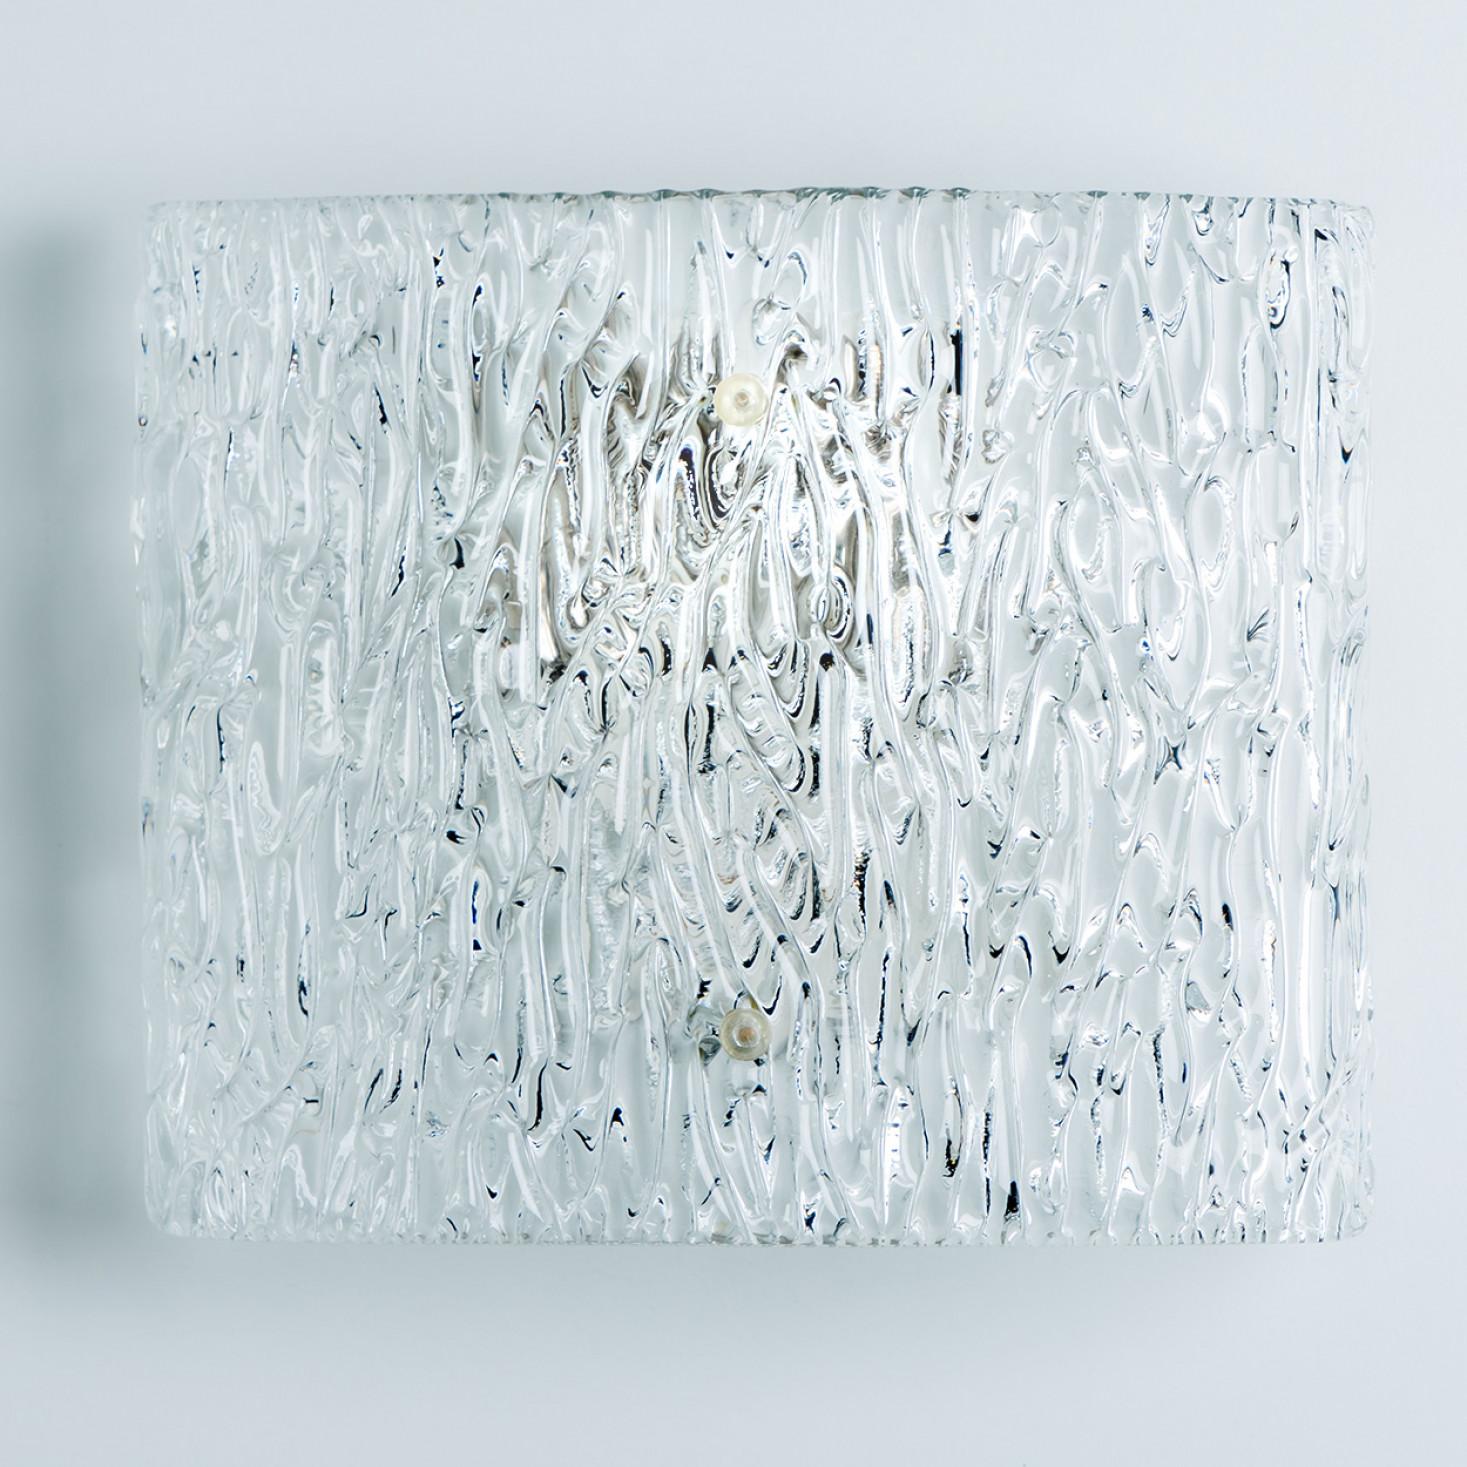 Beautiful high quality light fixture made by Kalmar, Austria. Manufactured in mid century, circa 1970 (at the end of 1960s and beginning of 1970s).

This wall light features lights made of handmade wave ice glass and silver back plate. The sides